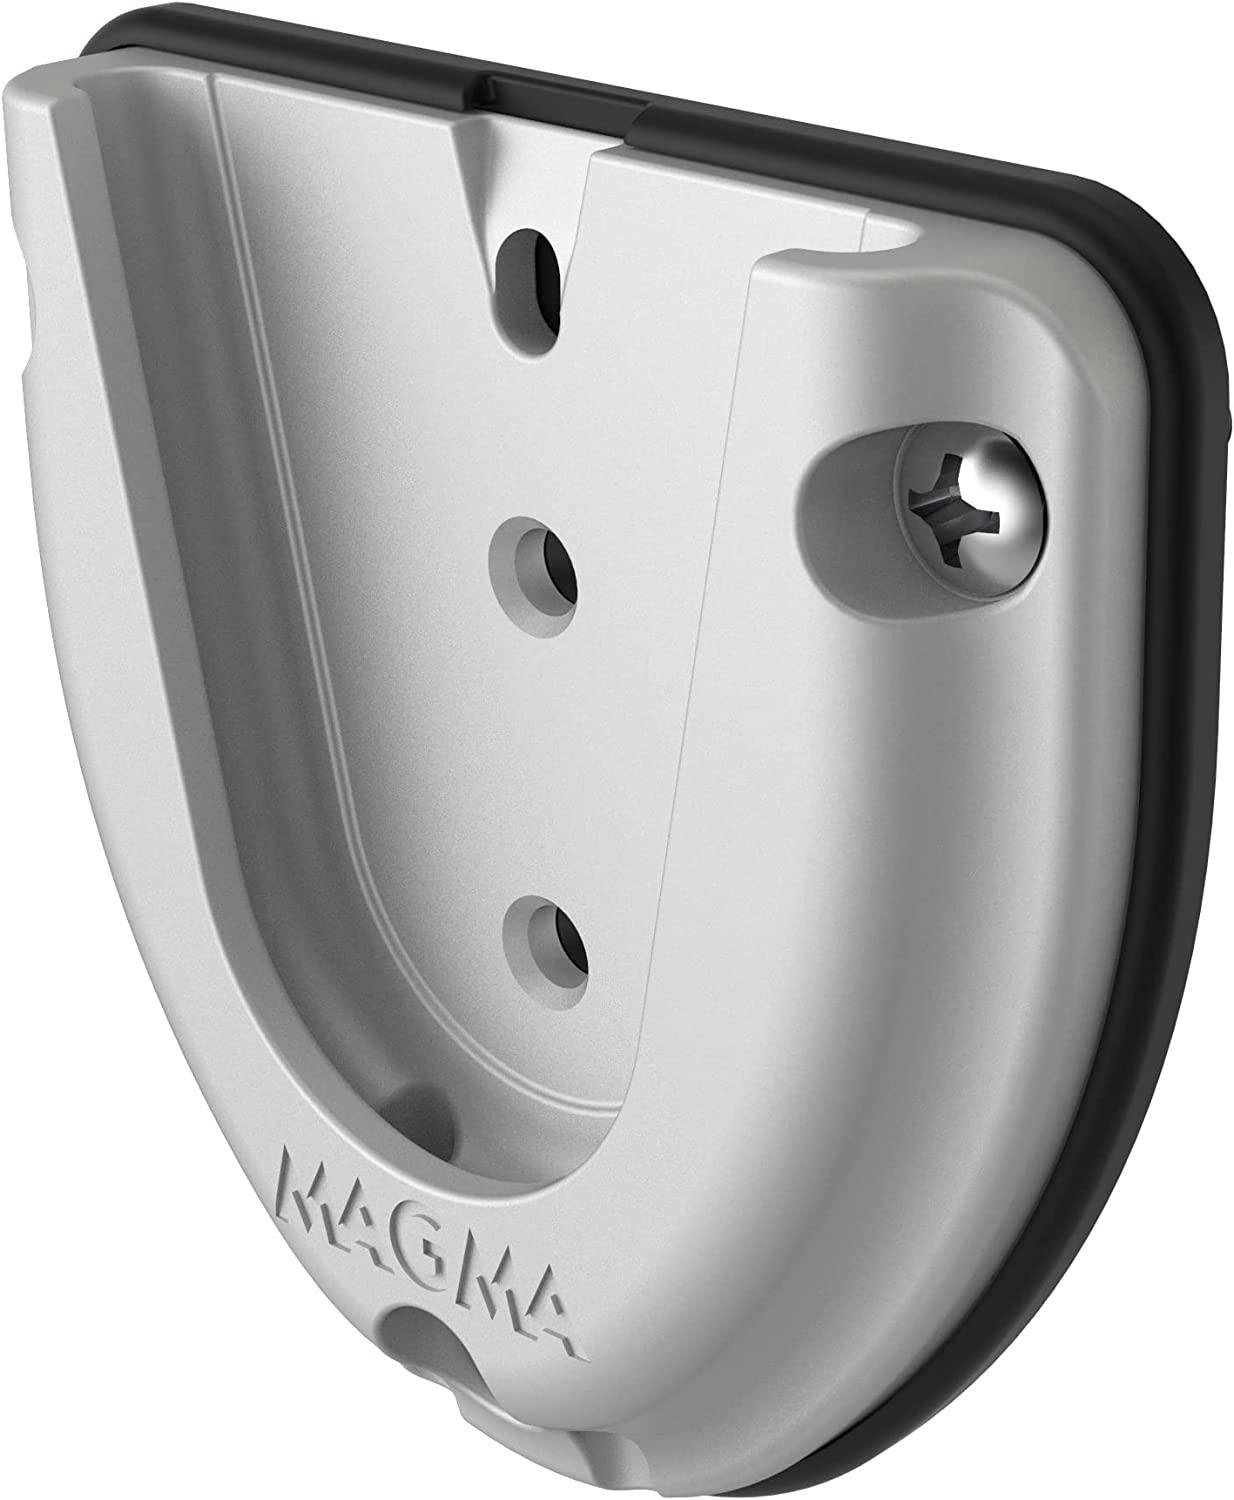 Magma Trailer Hitch Slide Mount Receiver Plate